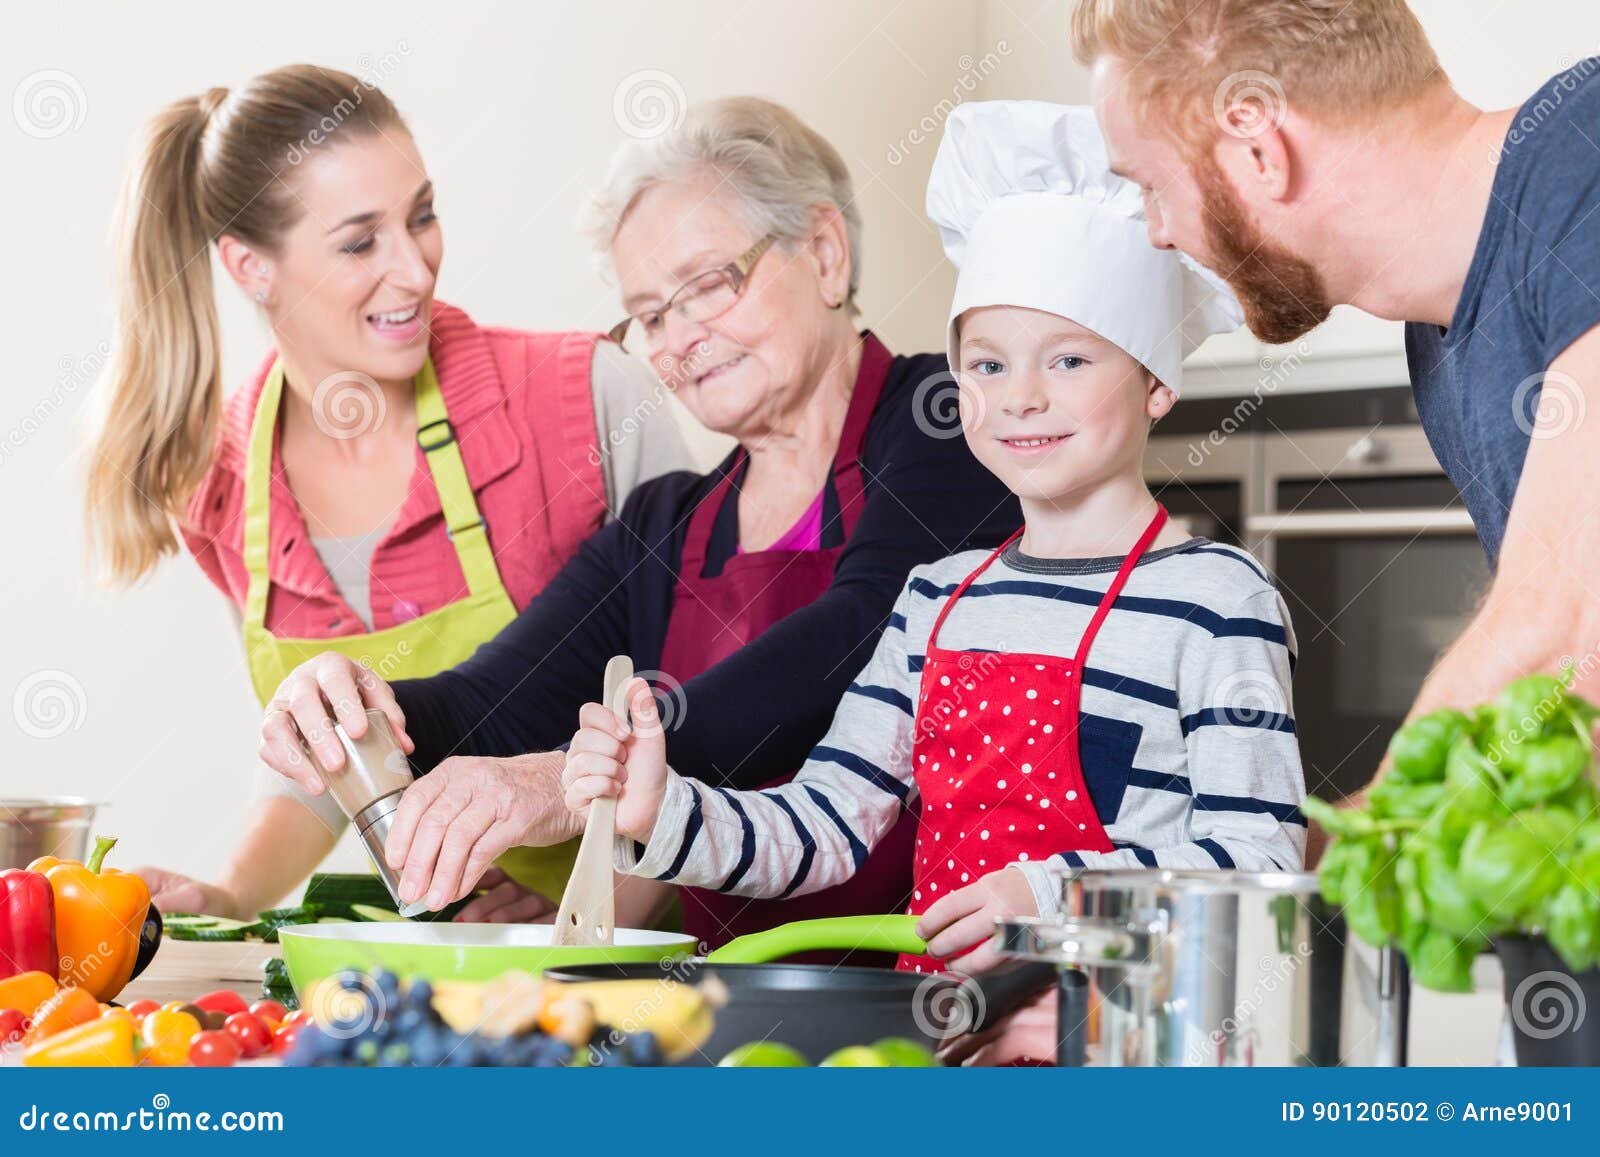 family cooking in multigenerational household with son, mother,